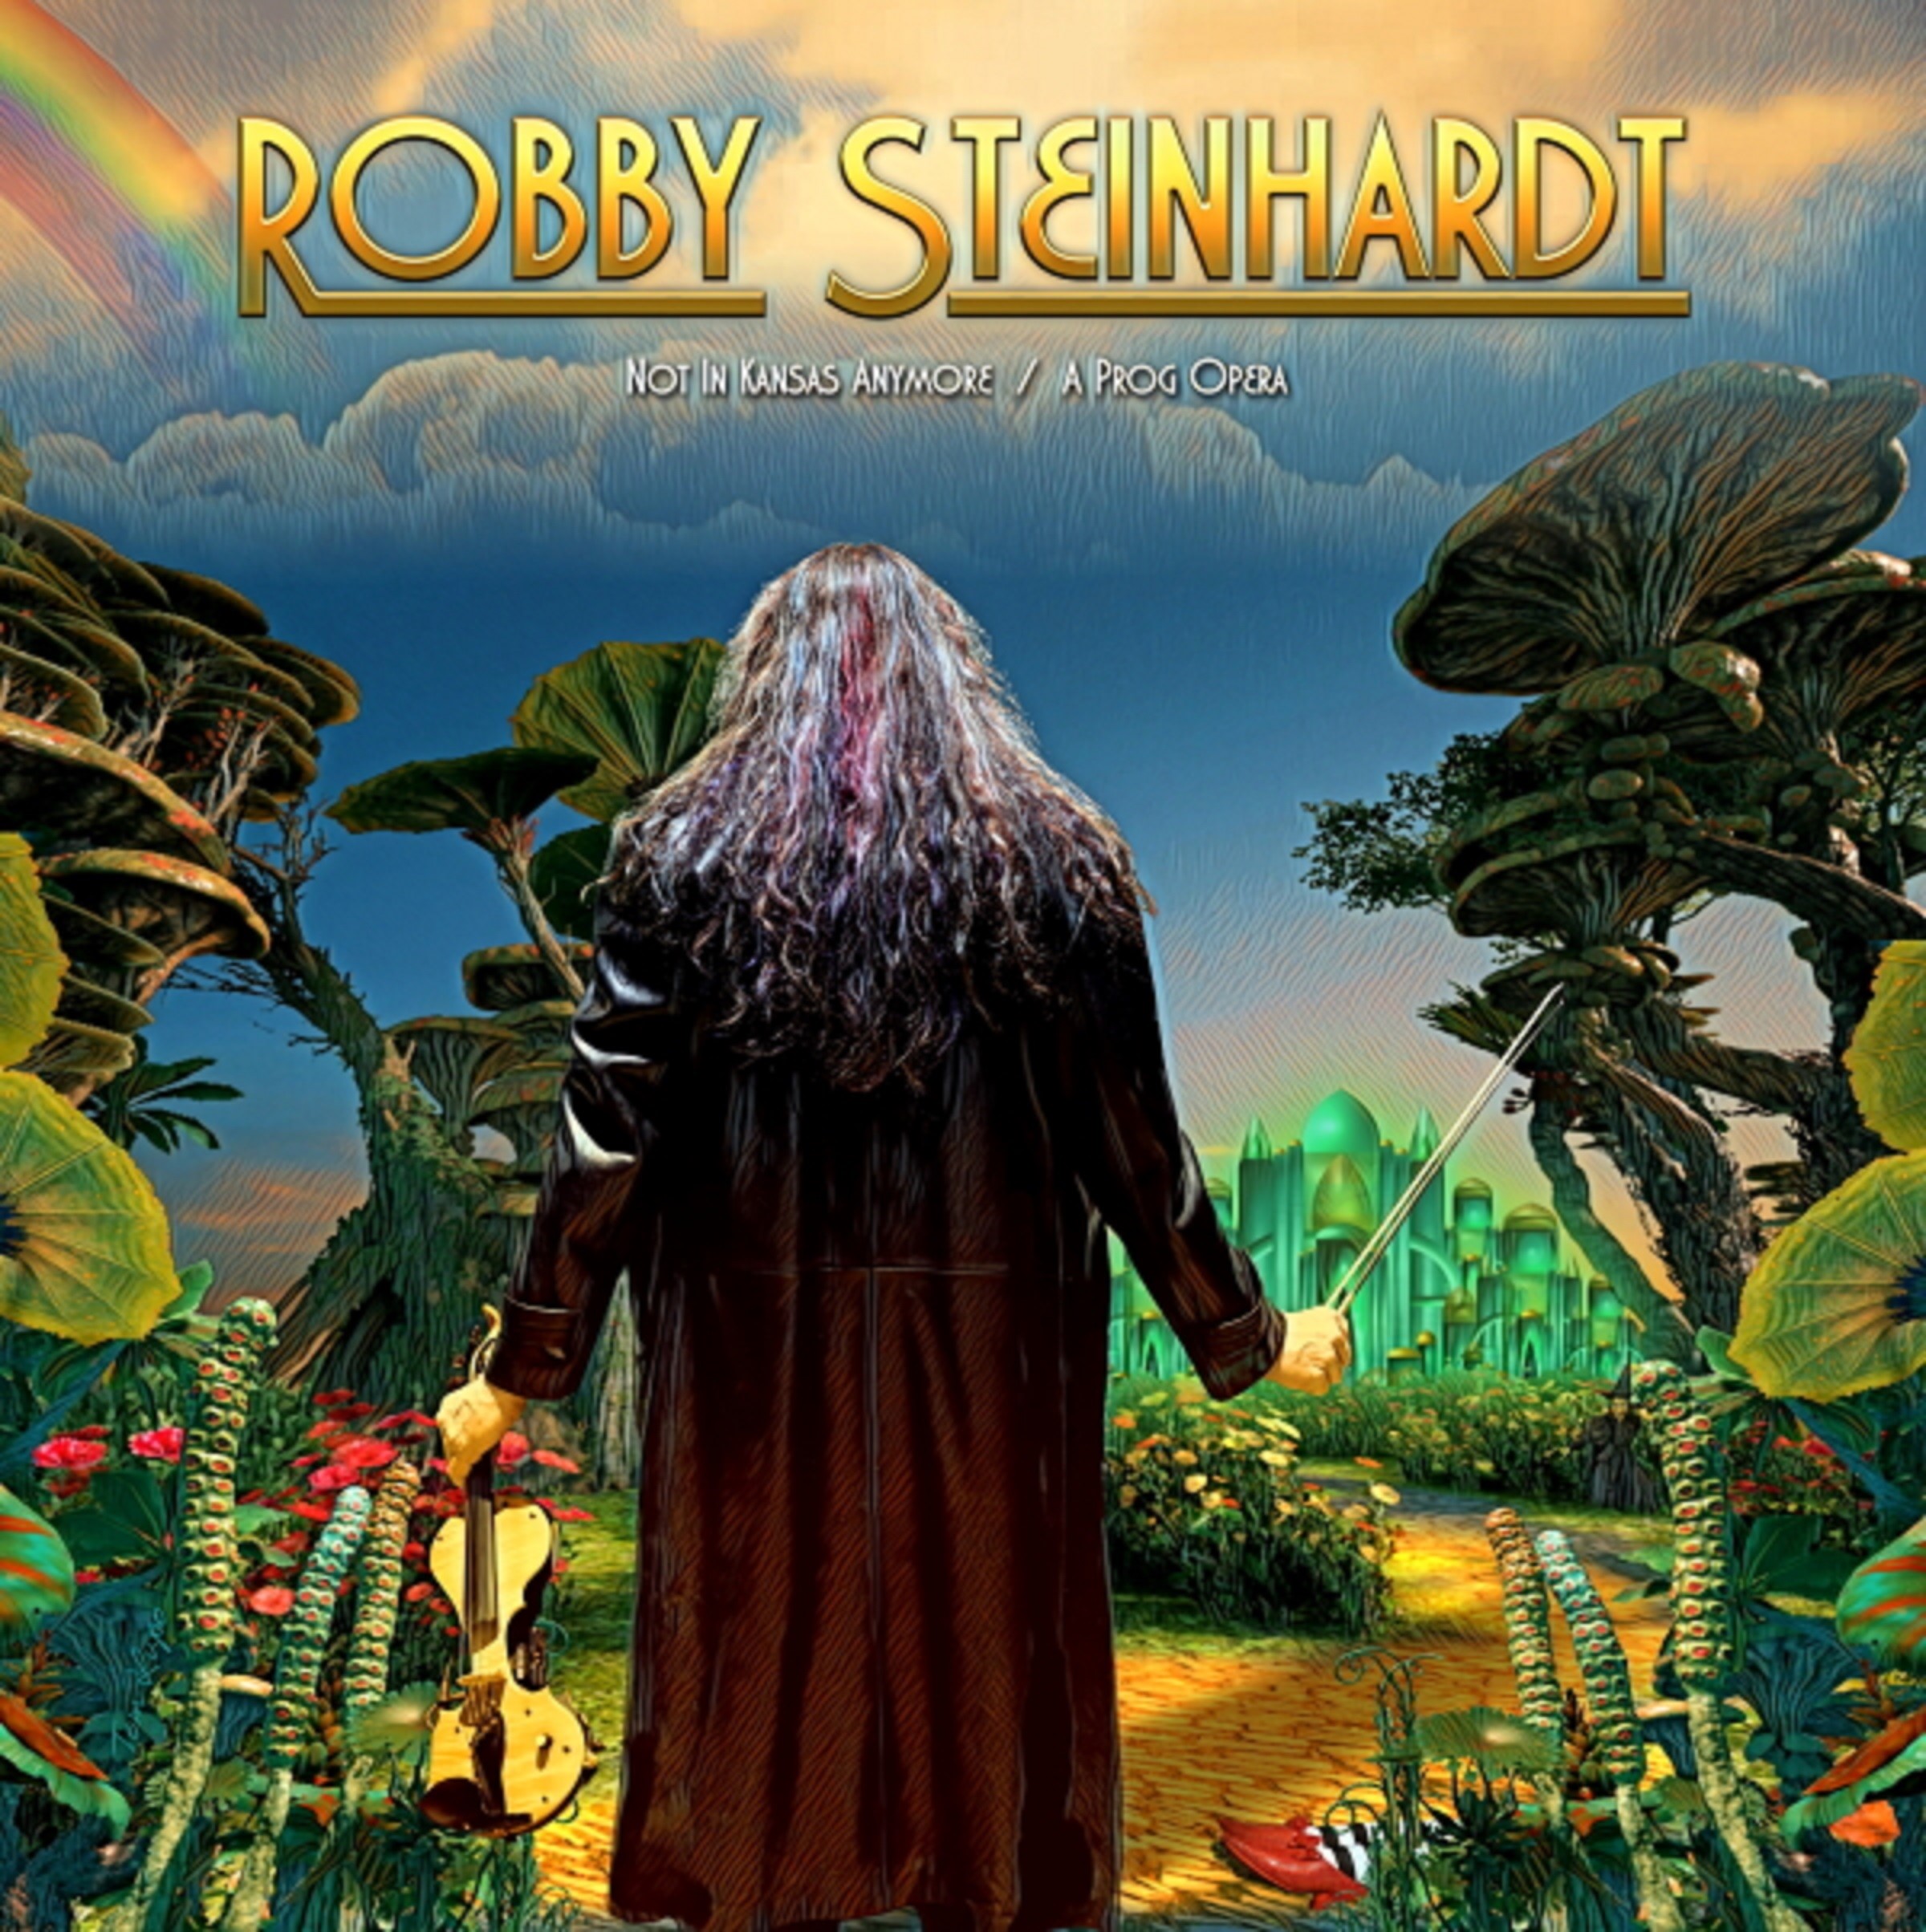 Robby Steinhardt's Solo Album 'Not in Kansas Anymore' To Be Released October 25, 2021